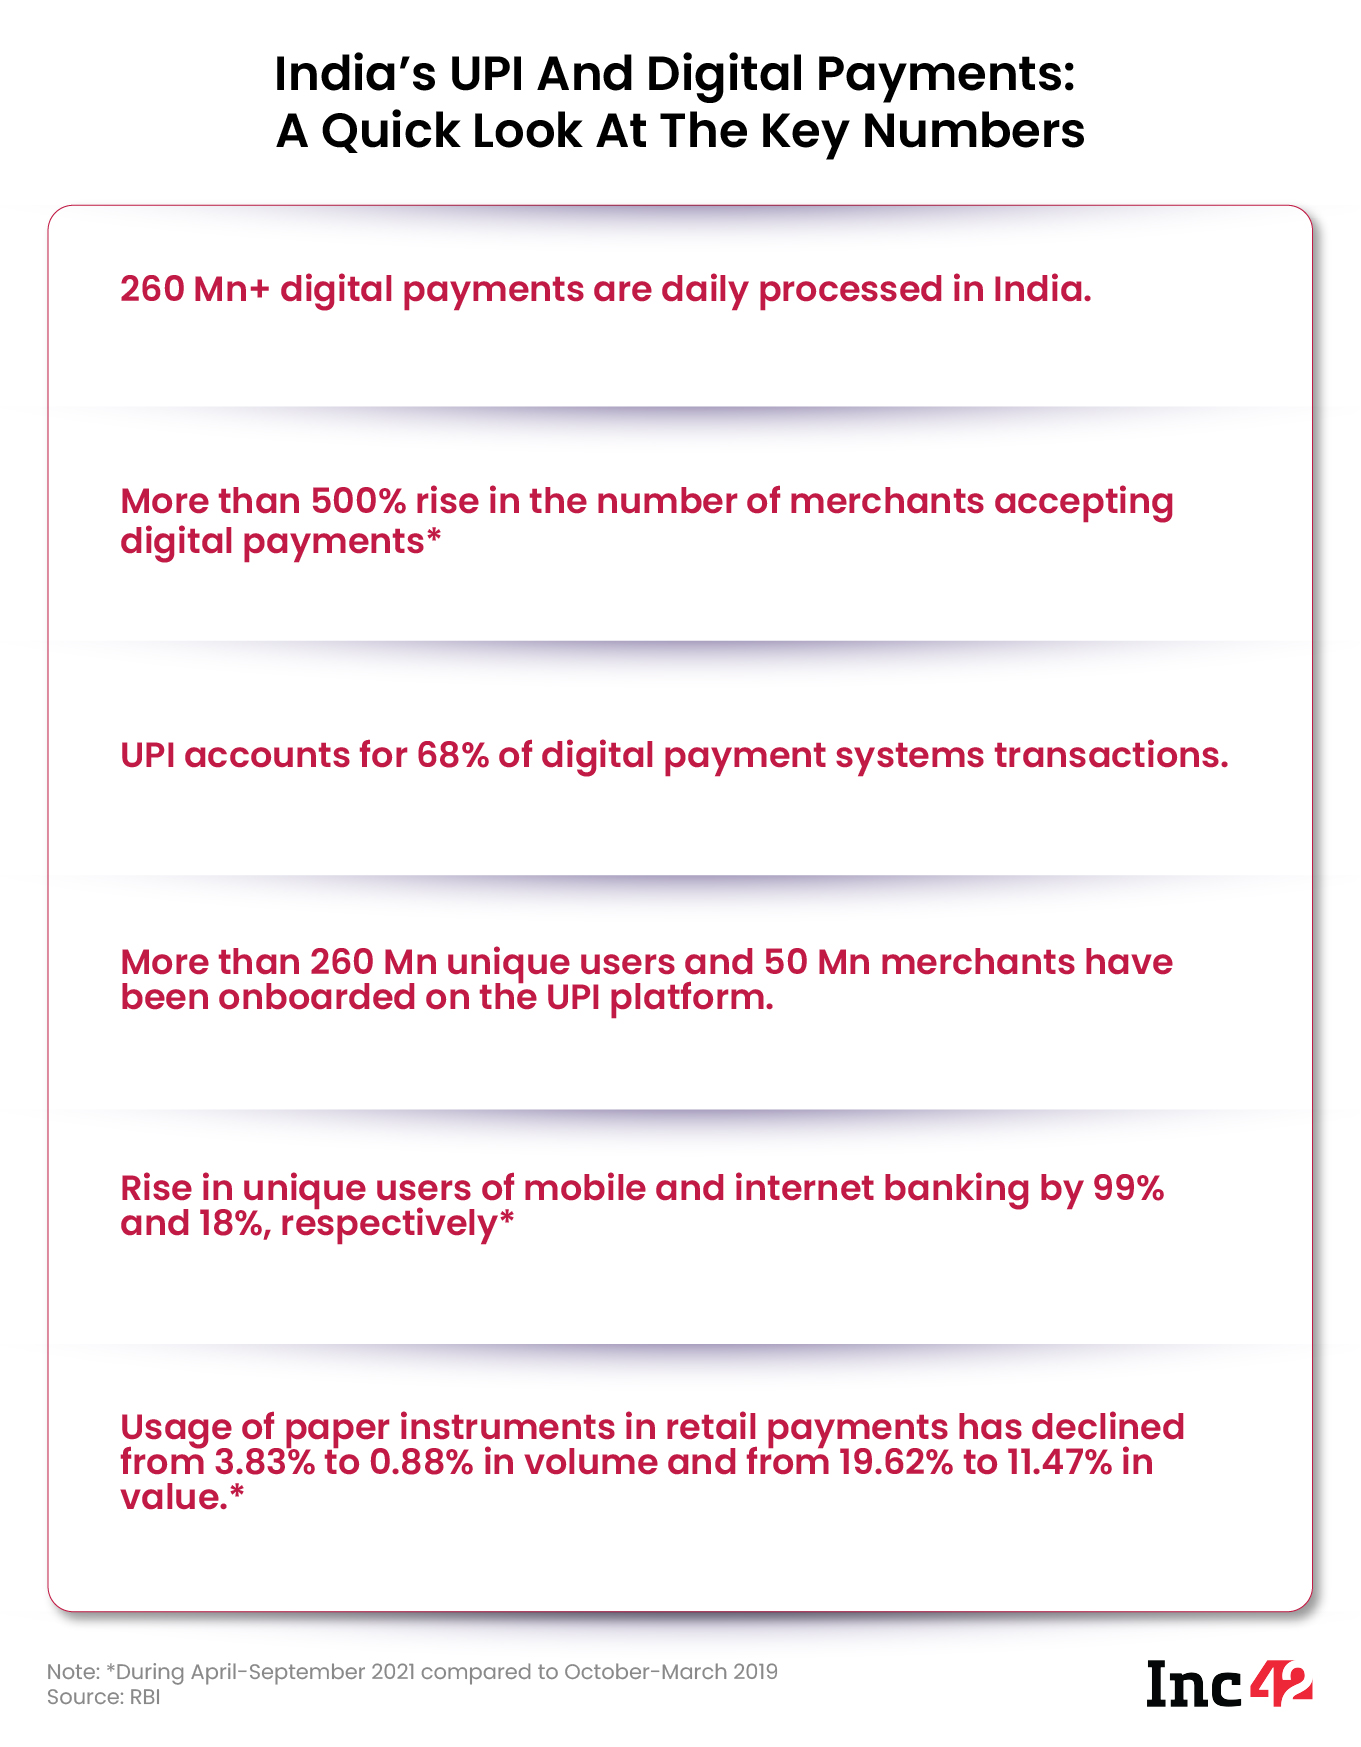 India's UPI and digital payments: A quick look at the key numbers